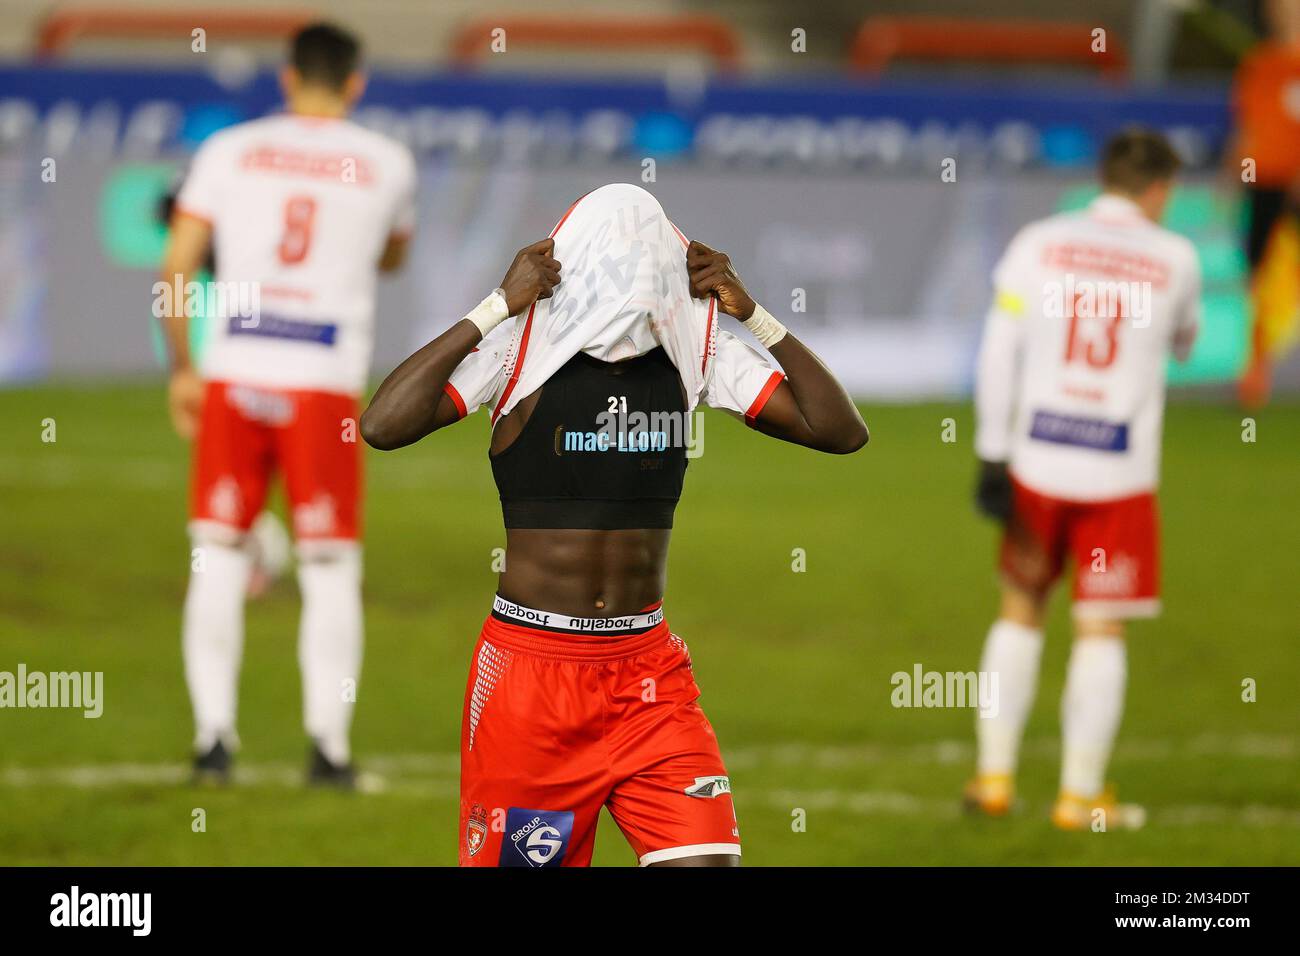 Mouscron's El Hadji Gueye leaves the field after receiving a red card during a soccer match between Royal Excel Mouscron and KV Kortrijk, Friday 05 February 2021 in Mouscron, on day 24 of the 'Jupiler Pro League' first division of the Belgian championship. BELGA PHOTO BRUNO FAHY Stock Photo